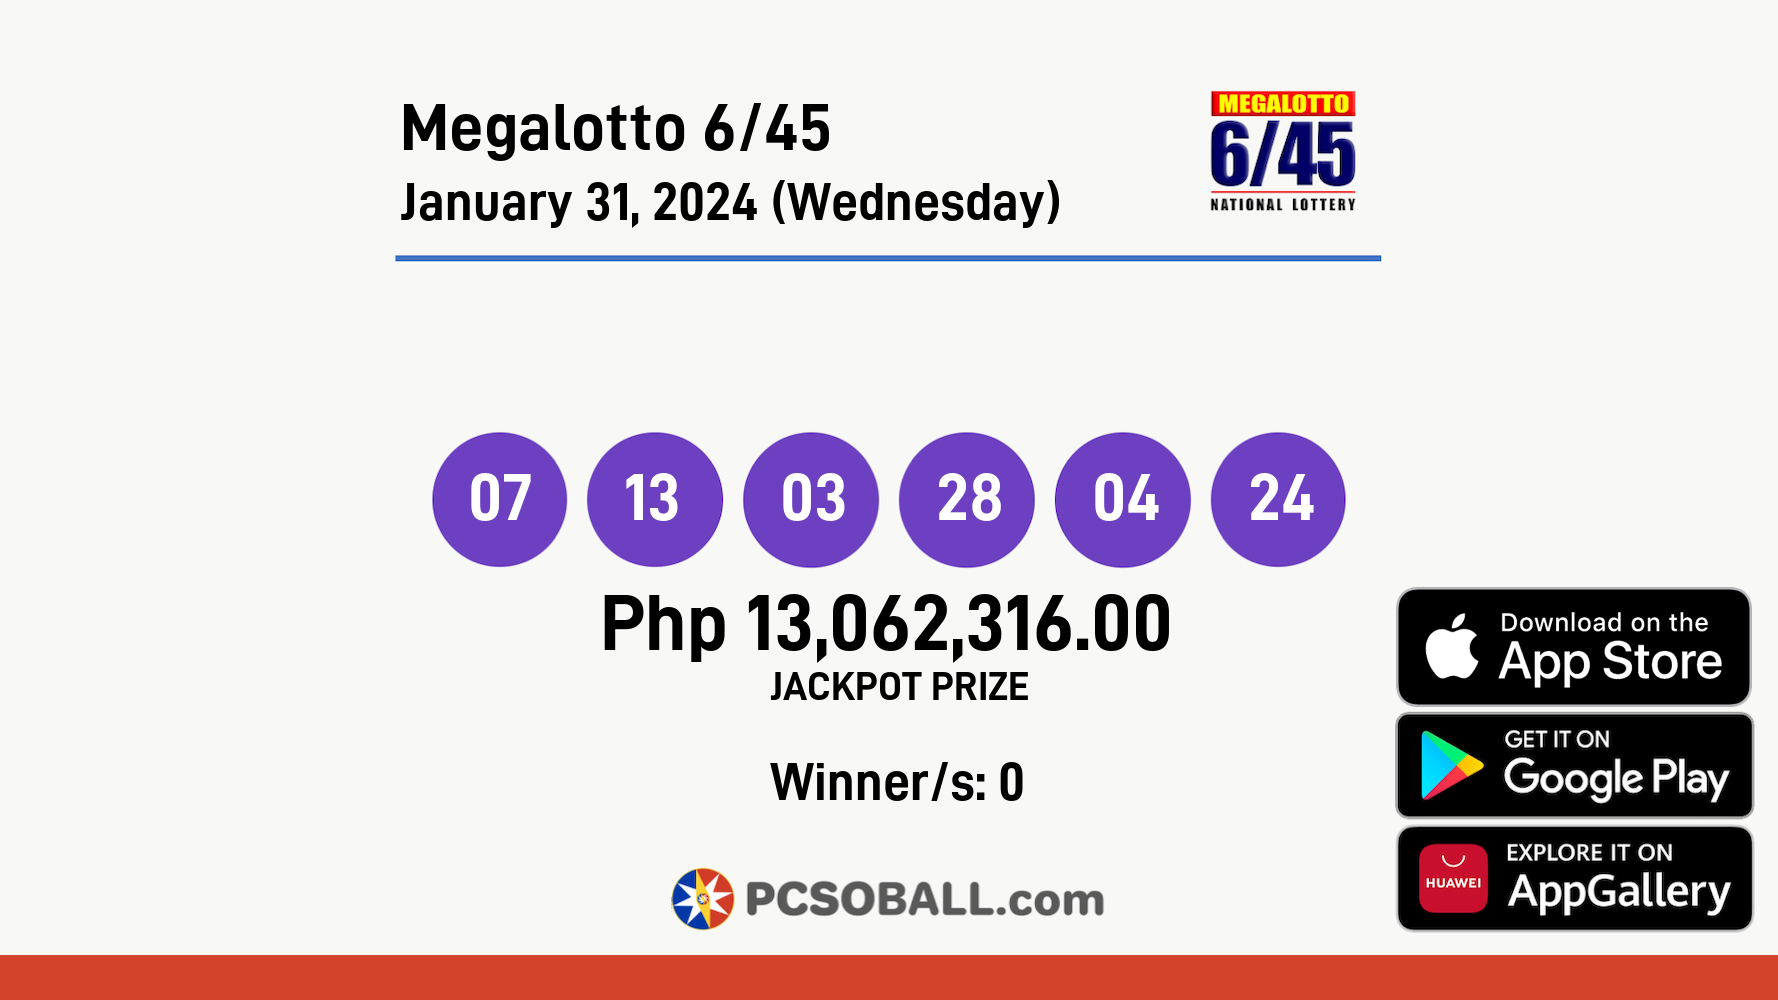 Megalotto 6/45 January 31, 2024 (Wednesday) Result